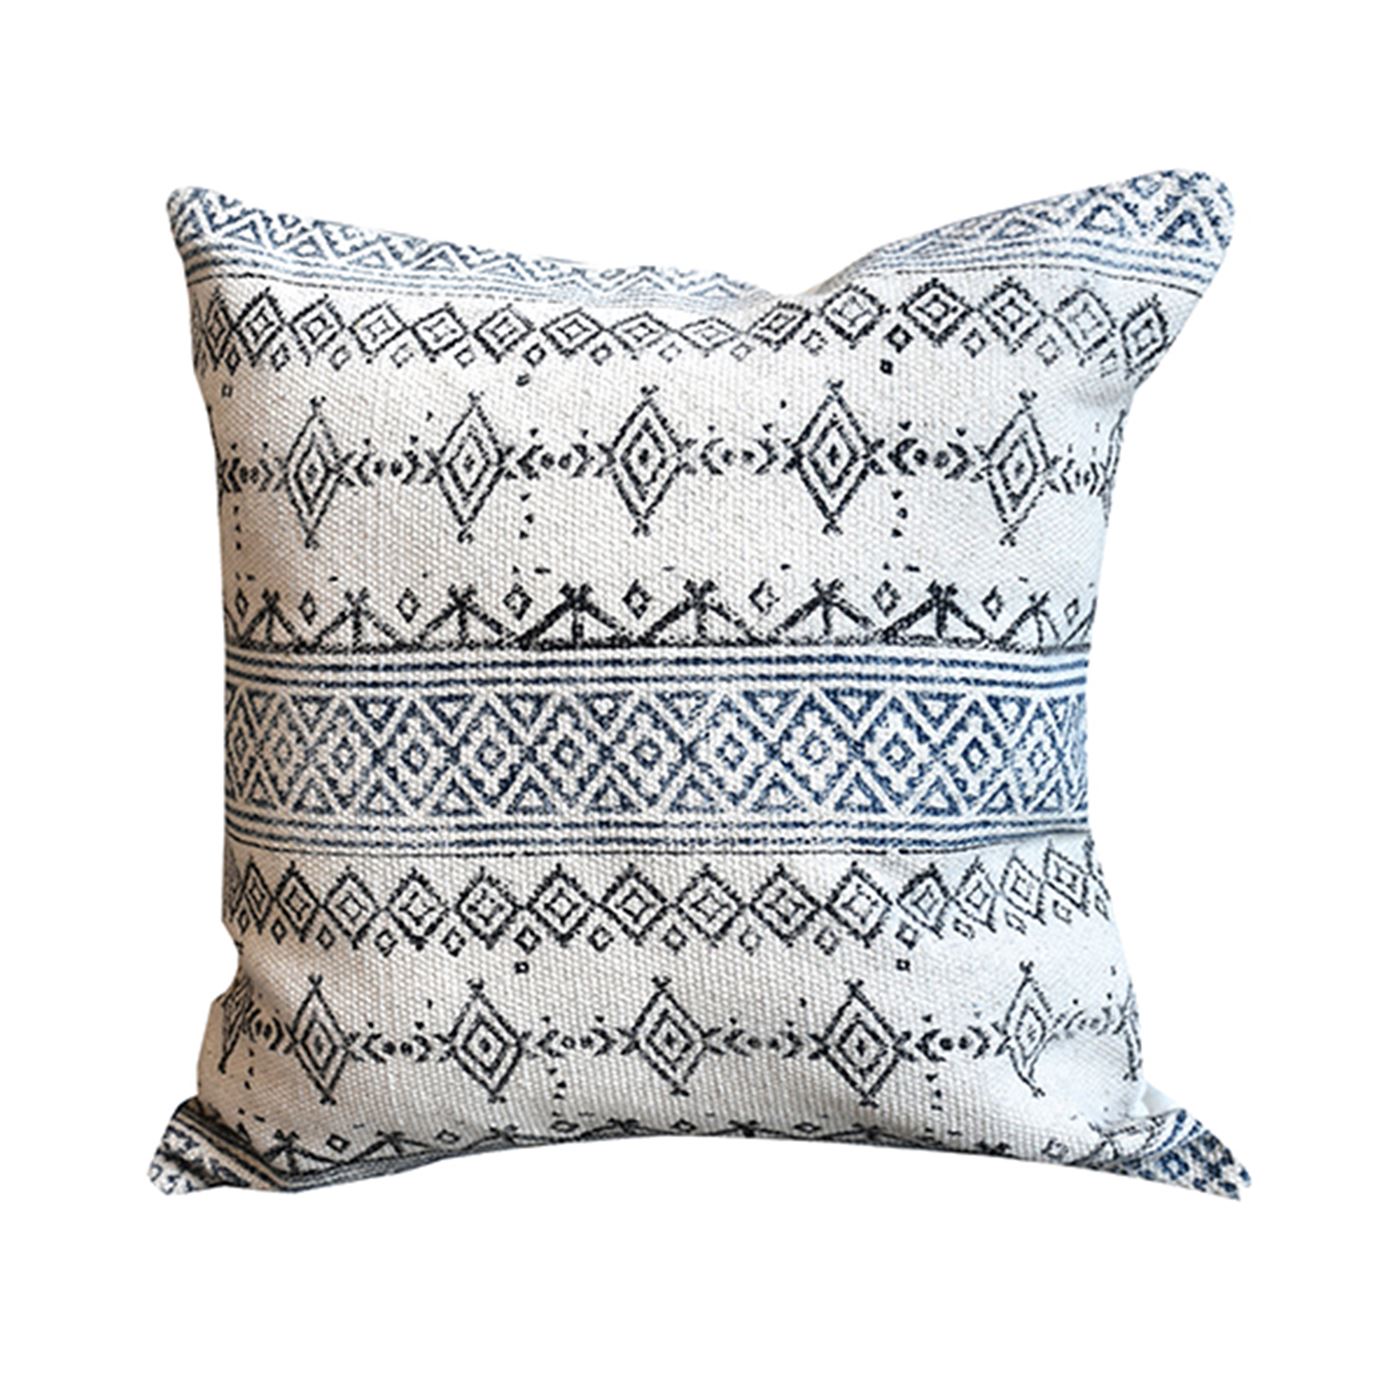 Venlo Pillow, Cotton, Printed, Natural White, Charcoal, Pitloom, Flat Weave